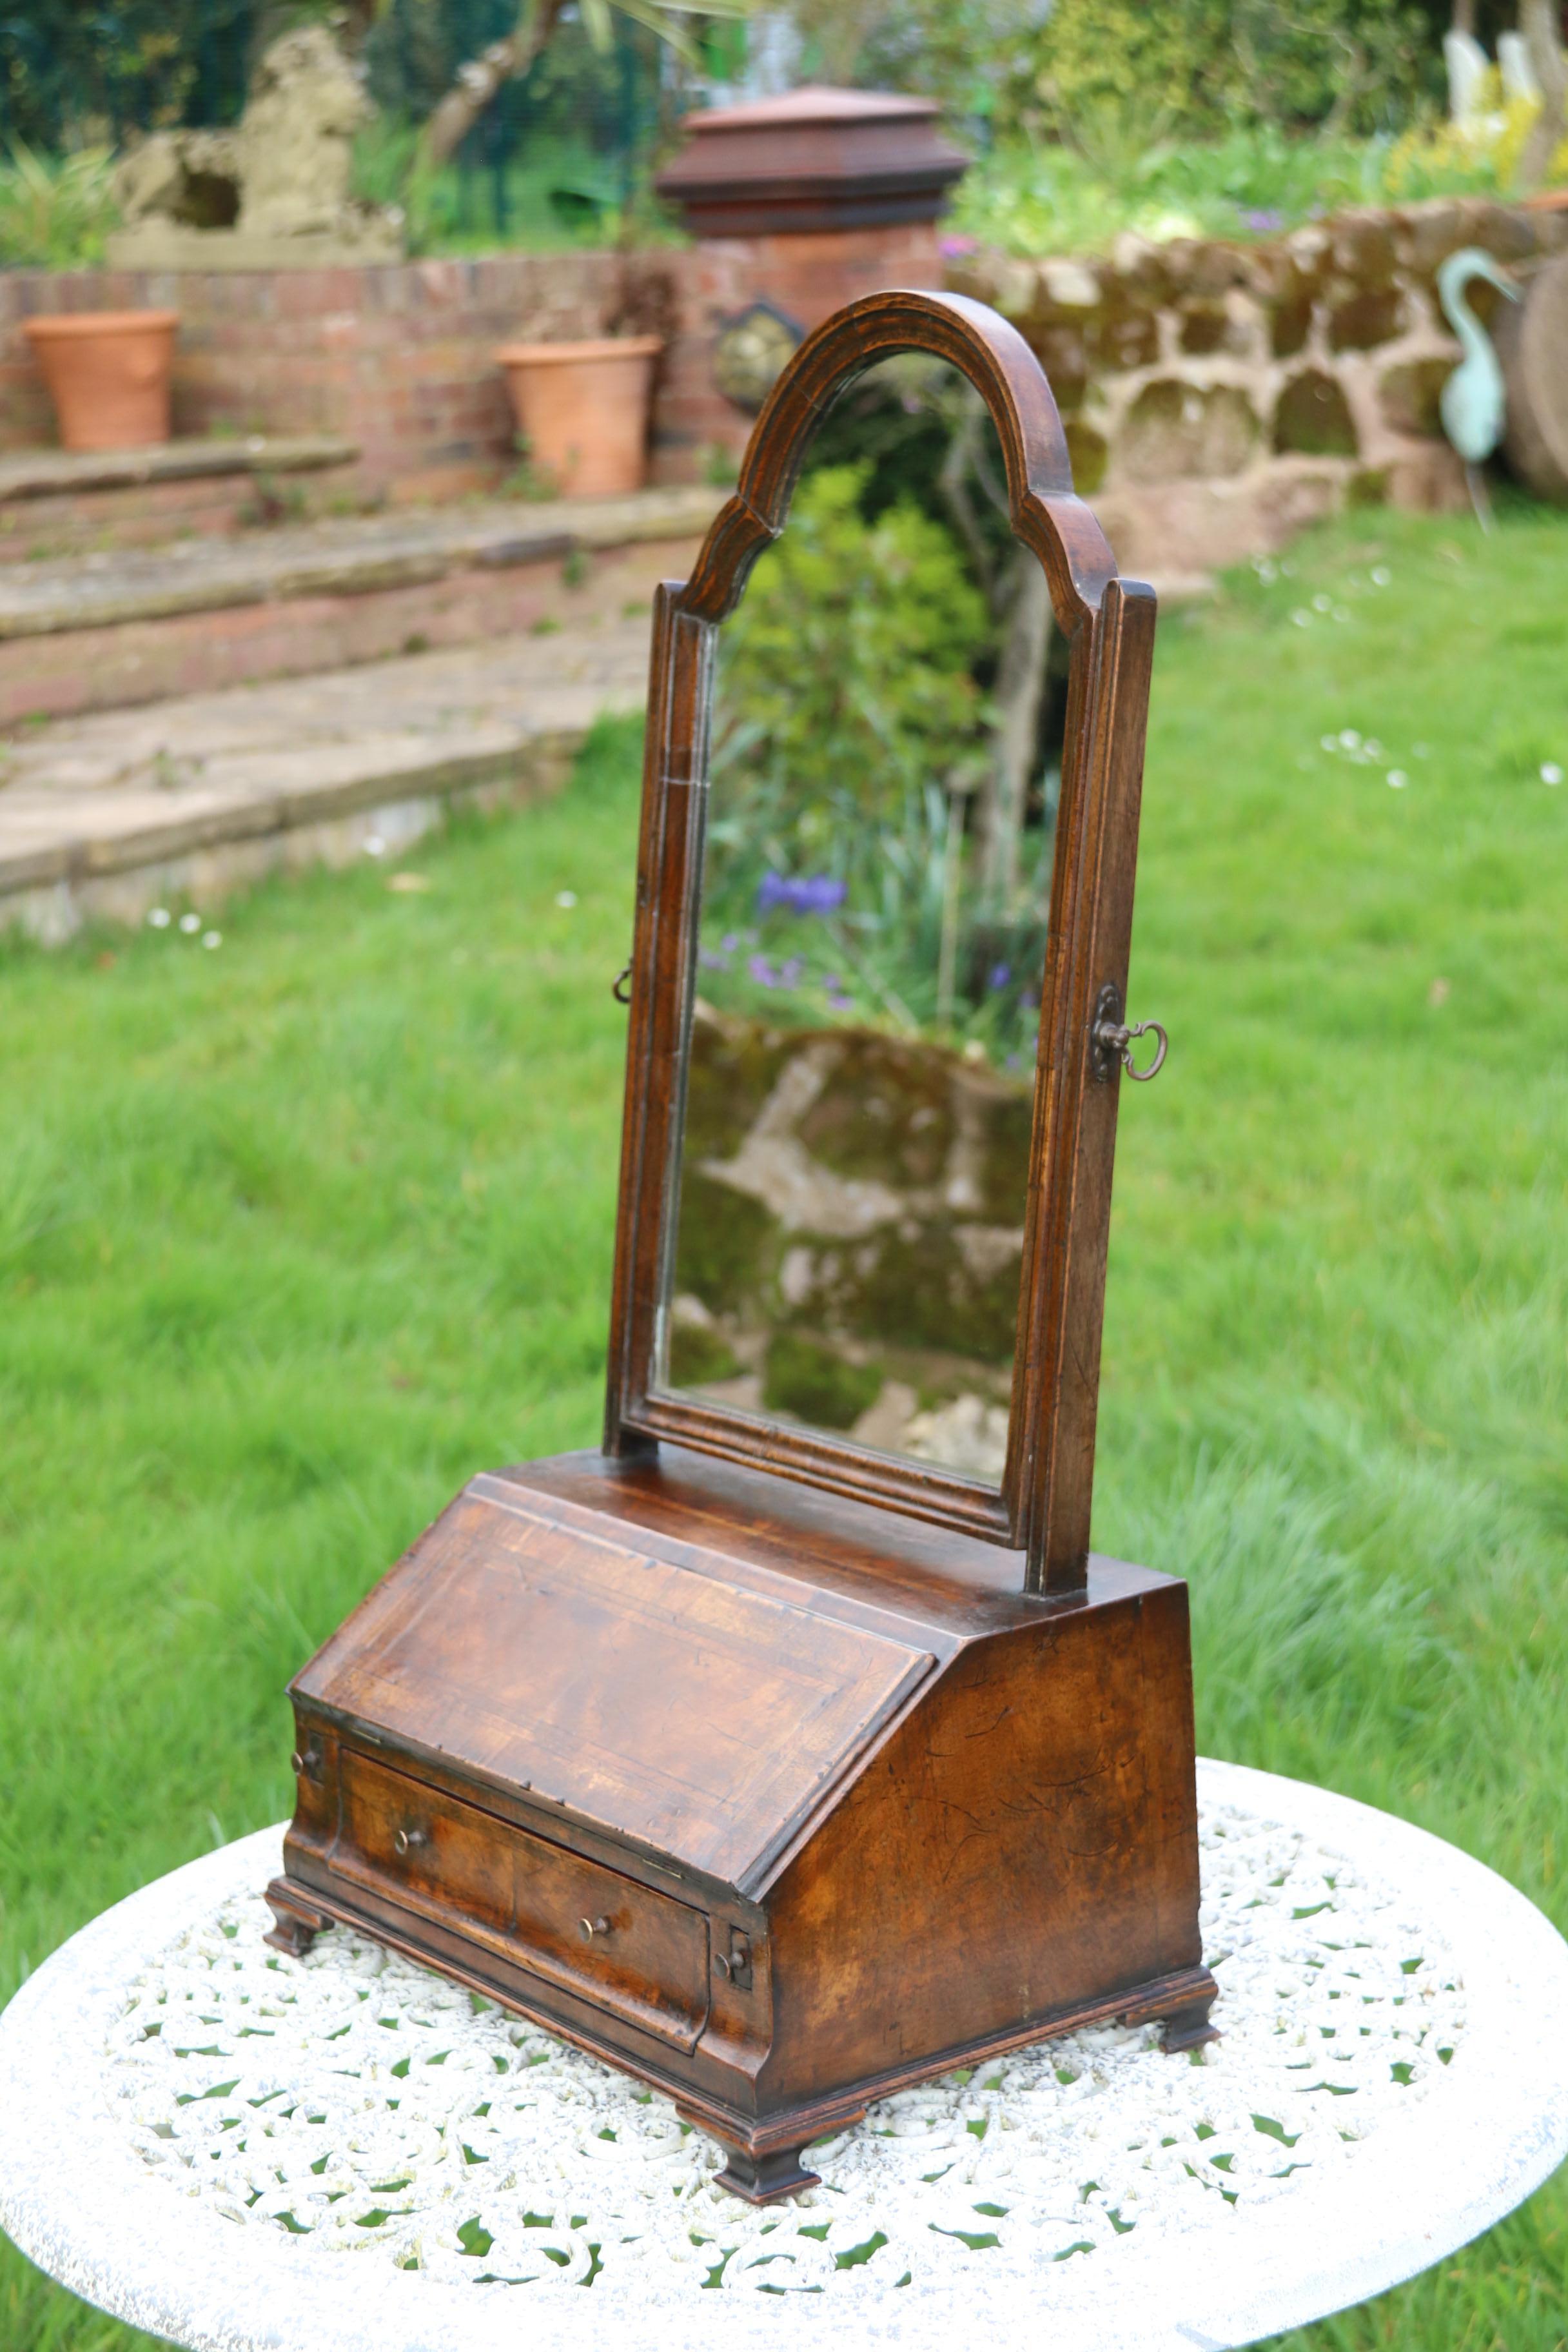 Antique rare early 18th century style figured walnut table mirror English C 1860 For Sale 5